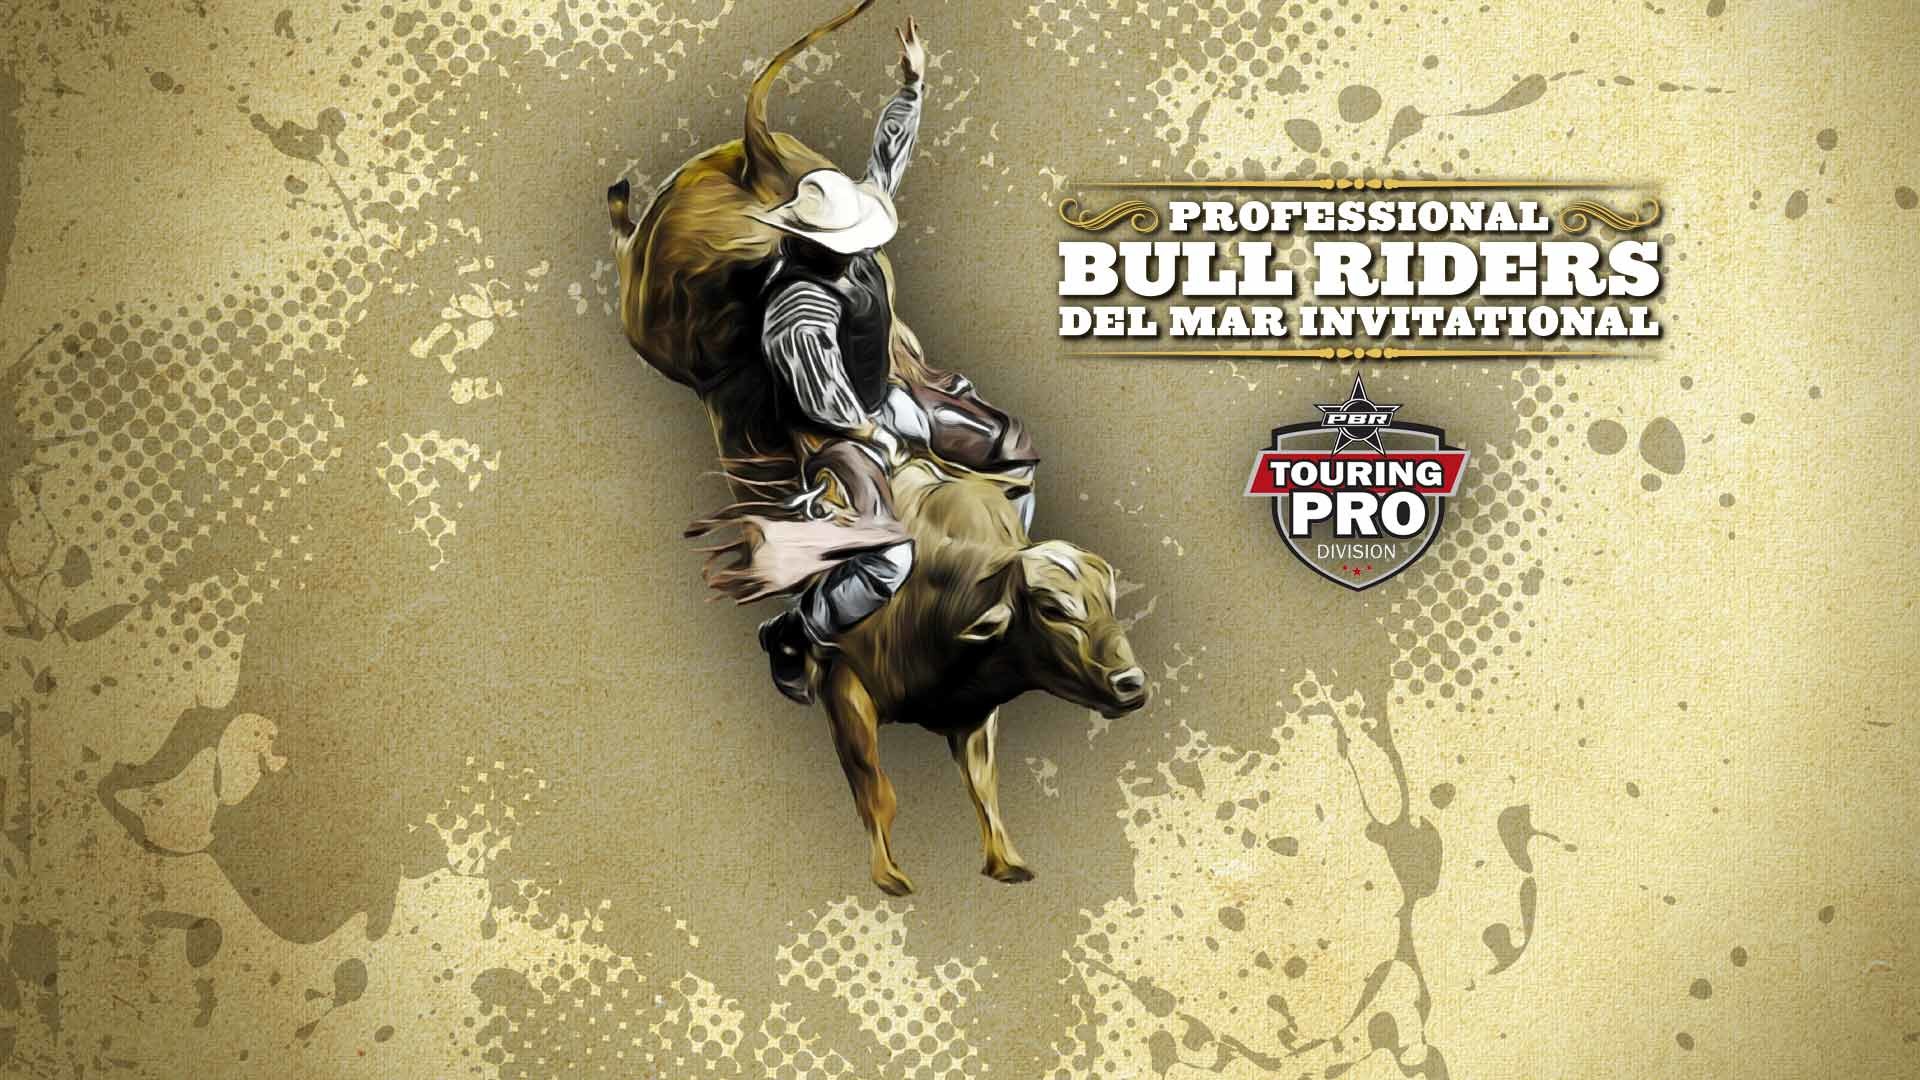 1920x1080 Get Info about PBR events in San Diego